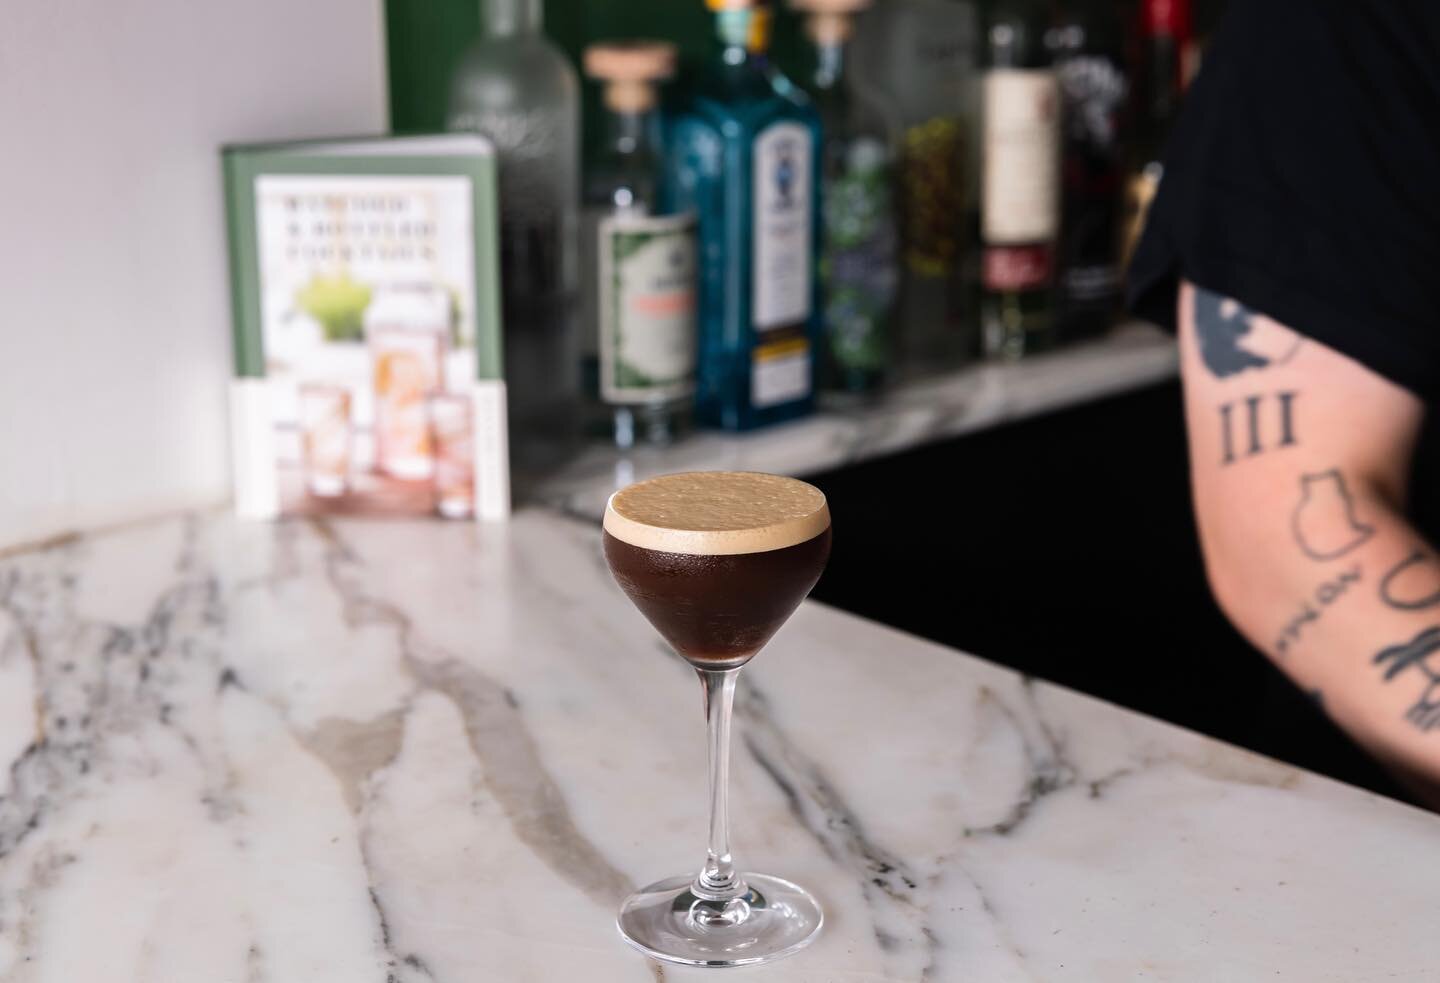 Espresso Martini 

Vodka - Coffee Concentrate - Salted Coffee Liqueur 

Shake it to wake it 

We do a strong hot brew with @dead_good_coffee 10:1 and steep for 20 mins to get a nice concentrate. 

For the liqueur we mix @merletspirits C2 coffee with 